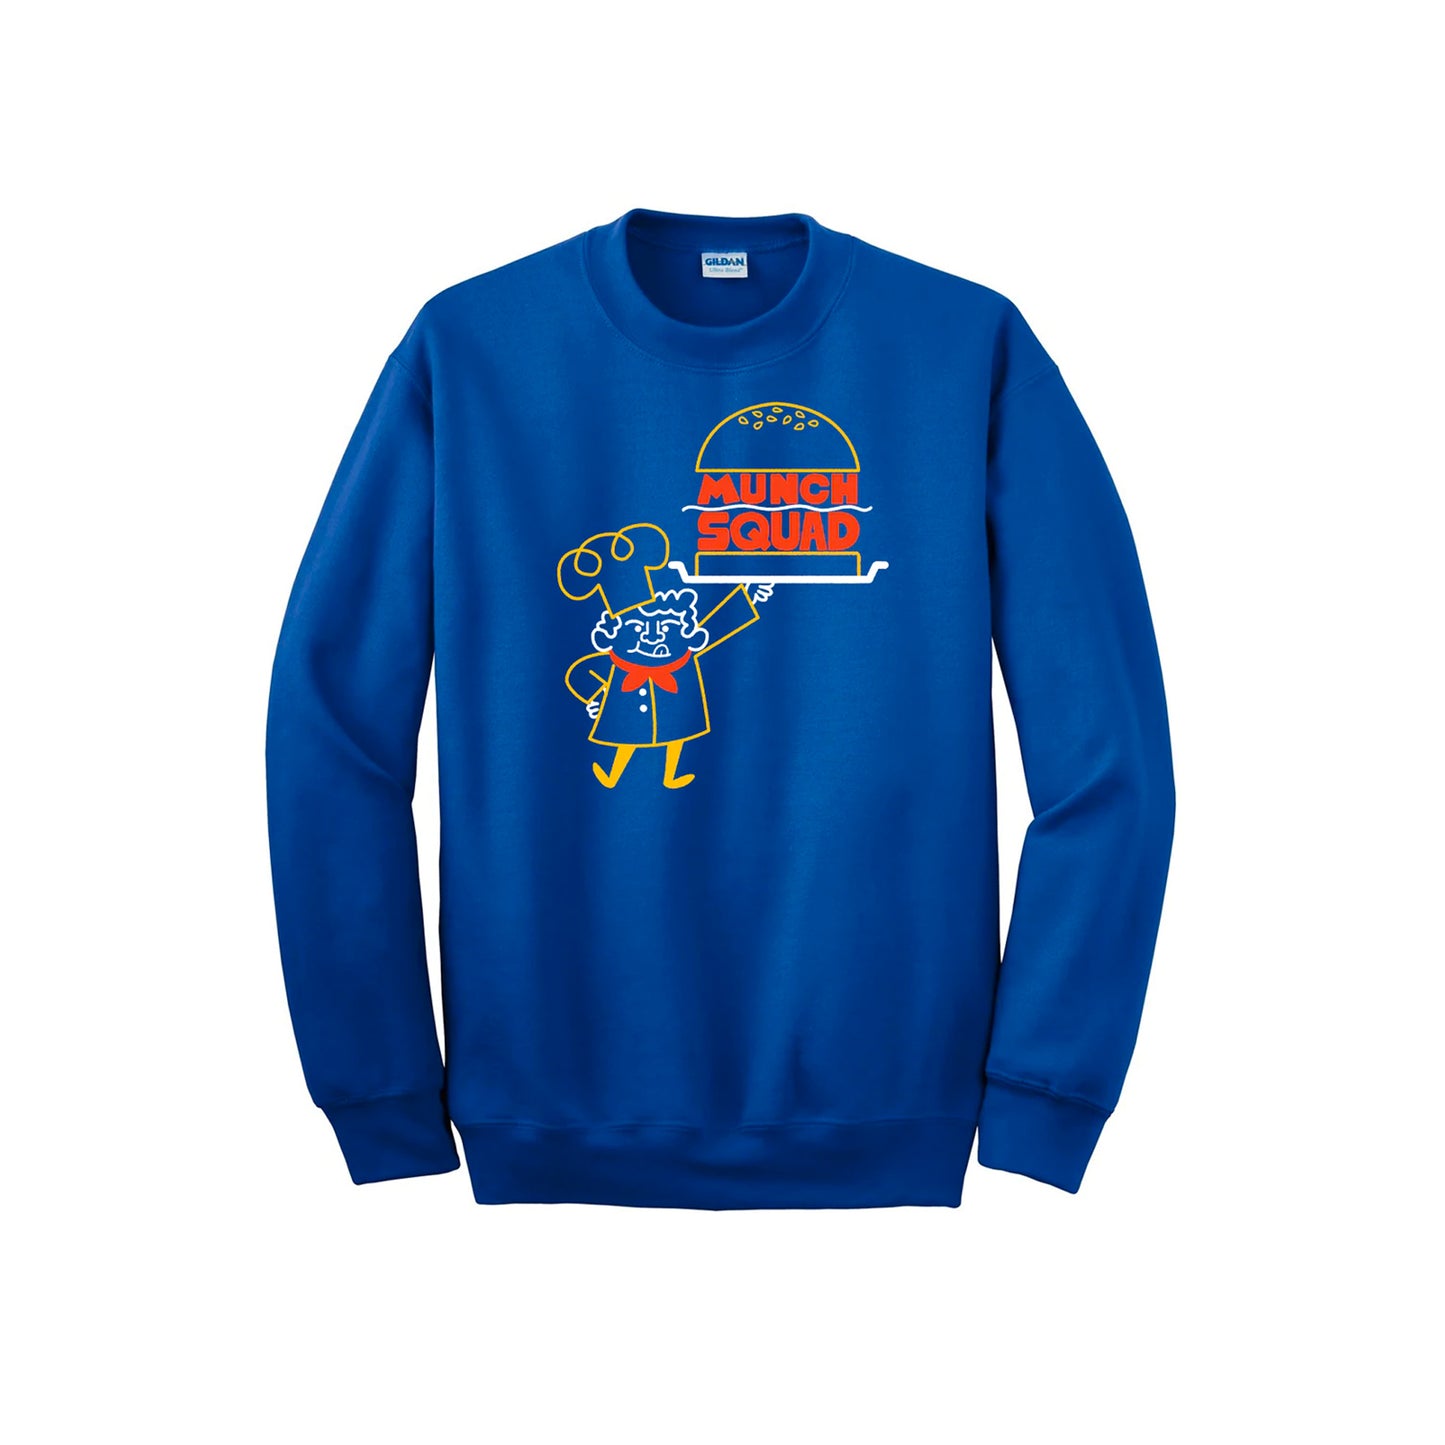 A dark blue crew neck sweatshirt. There is a line drawing of a chef wearing a large hat and a red ascot holding up a plate with a line drawing of a burger. Between the two buns of the burger it says "Munch Squad" in red block letters with a white squiggly line between the two words.